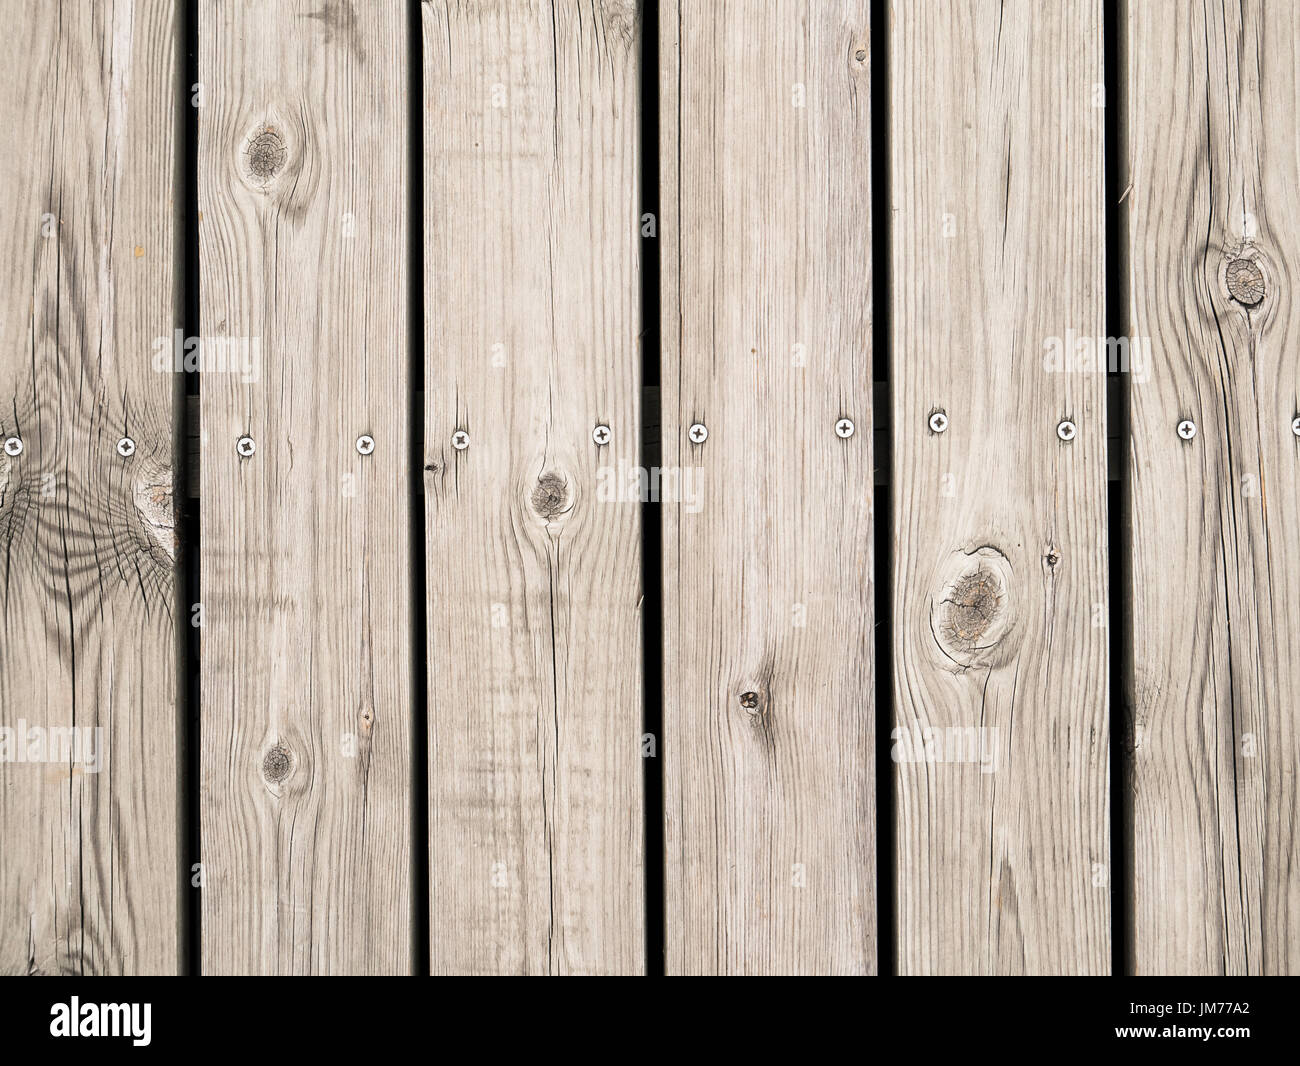 Timber Wall Background With Screws Stock Photo 150135498 Alamy